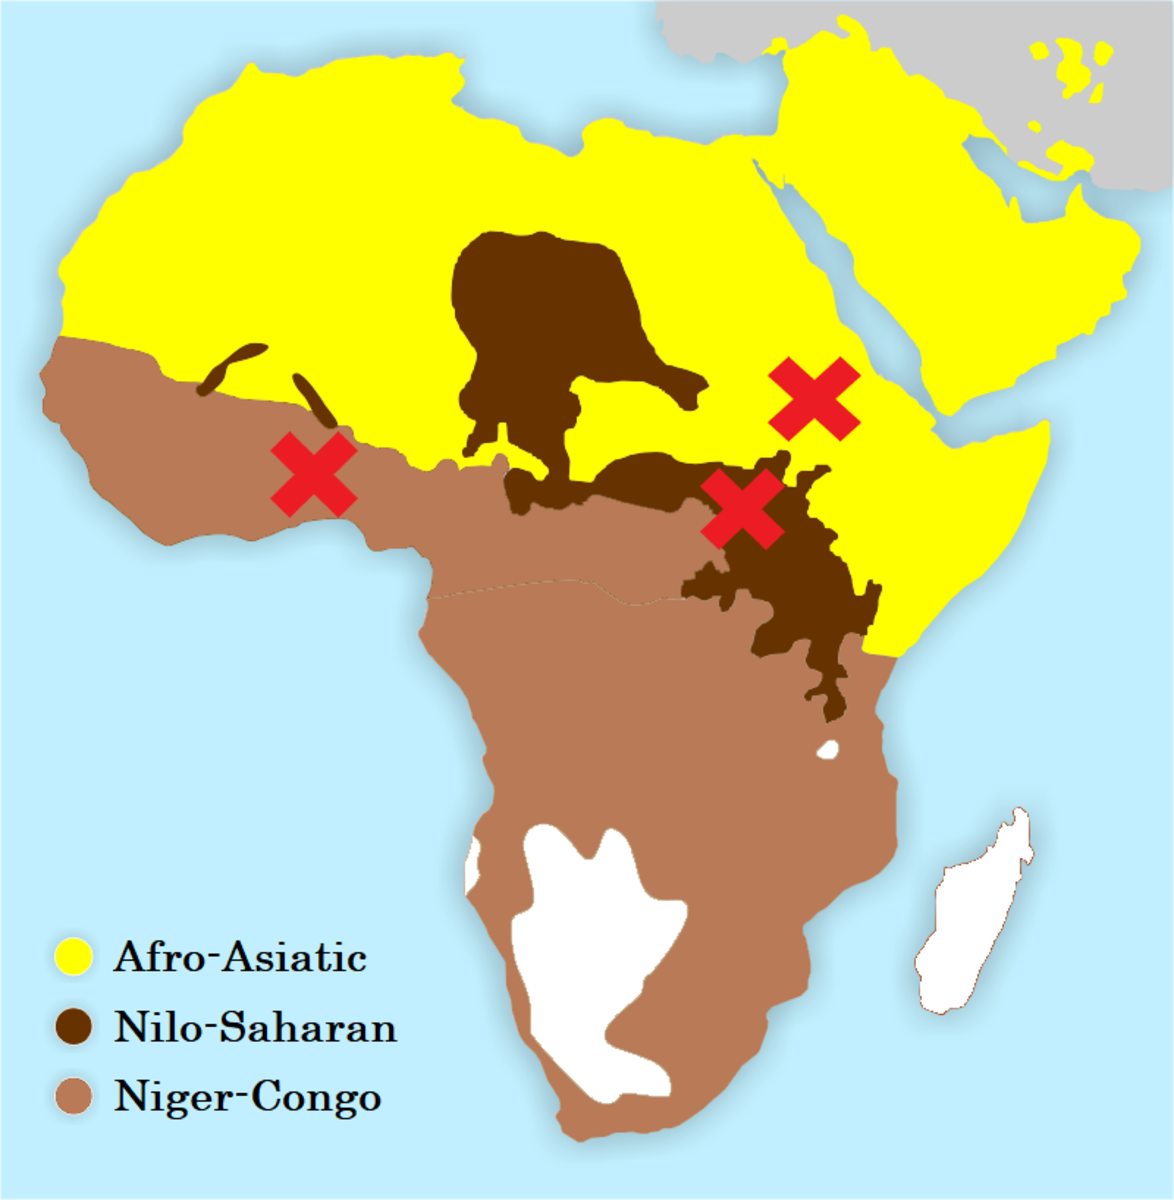 The major African language families and their possible origins (crosses). The white mainland areas contain smaller families or isolates, while Madagascar is Austric (below).